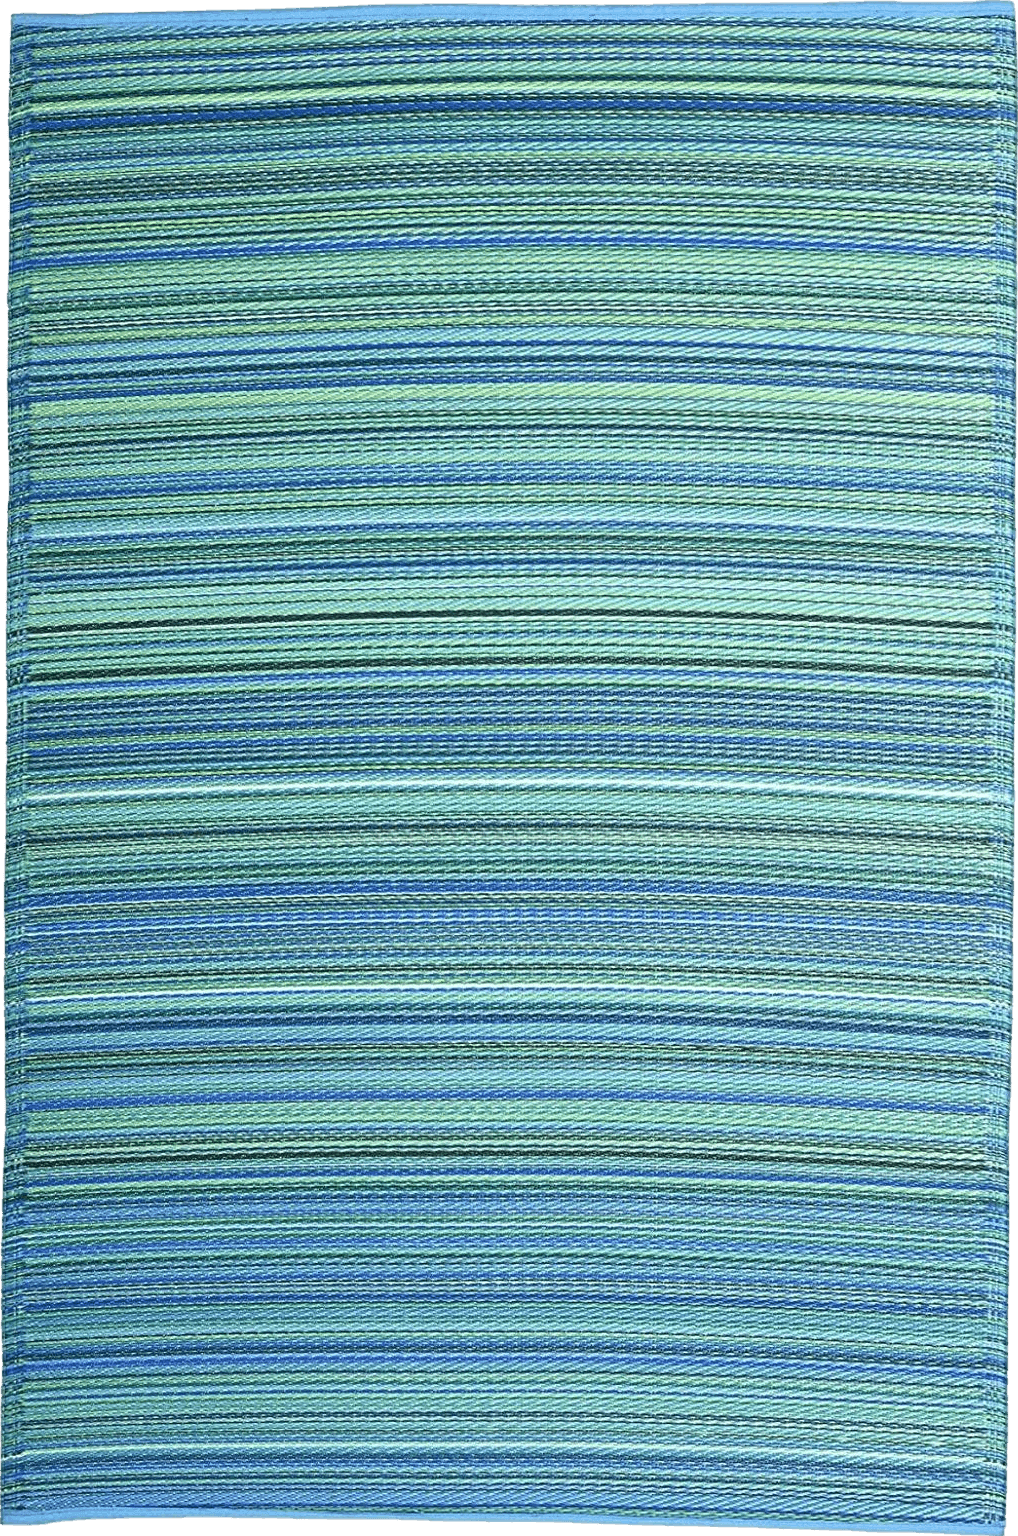 Moss Fab Habitat Outdoor Rug - Waterproof, Fade Resistant, Crease-Free - Premium Recycled Plastic - Striped - Patio, Deck, Porch, Balcony, Laundry Room - Cancun - Turquoise & Moss Green - 4 x 6 ft